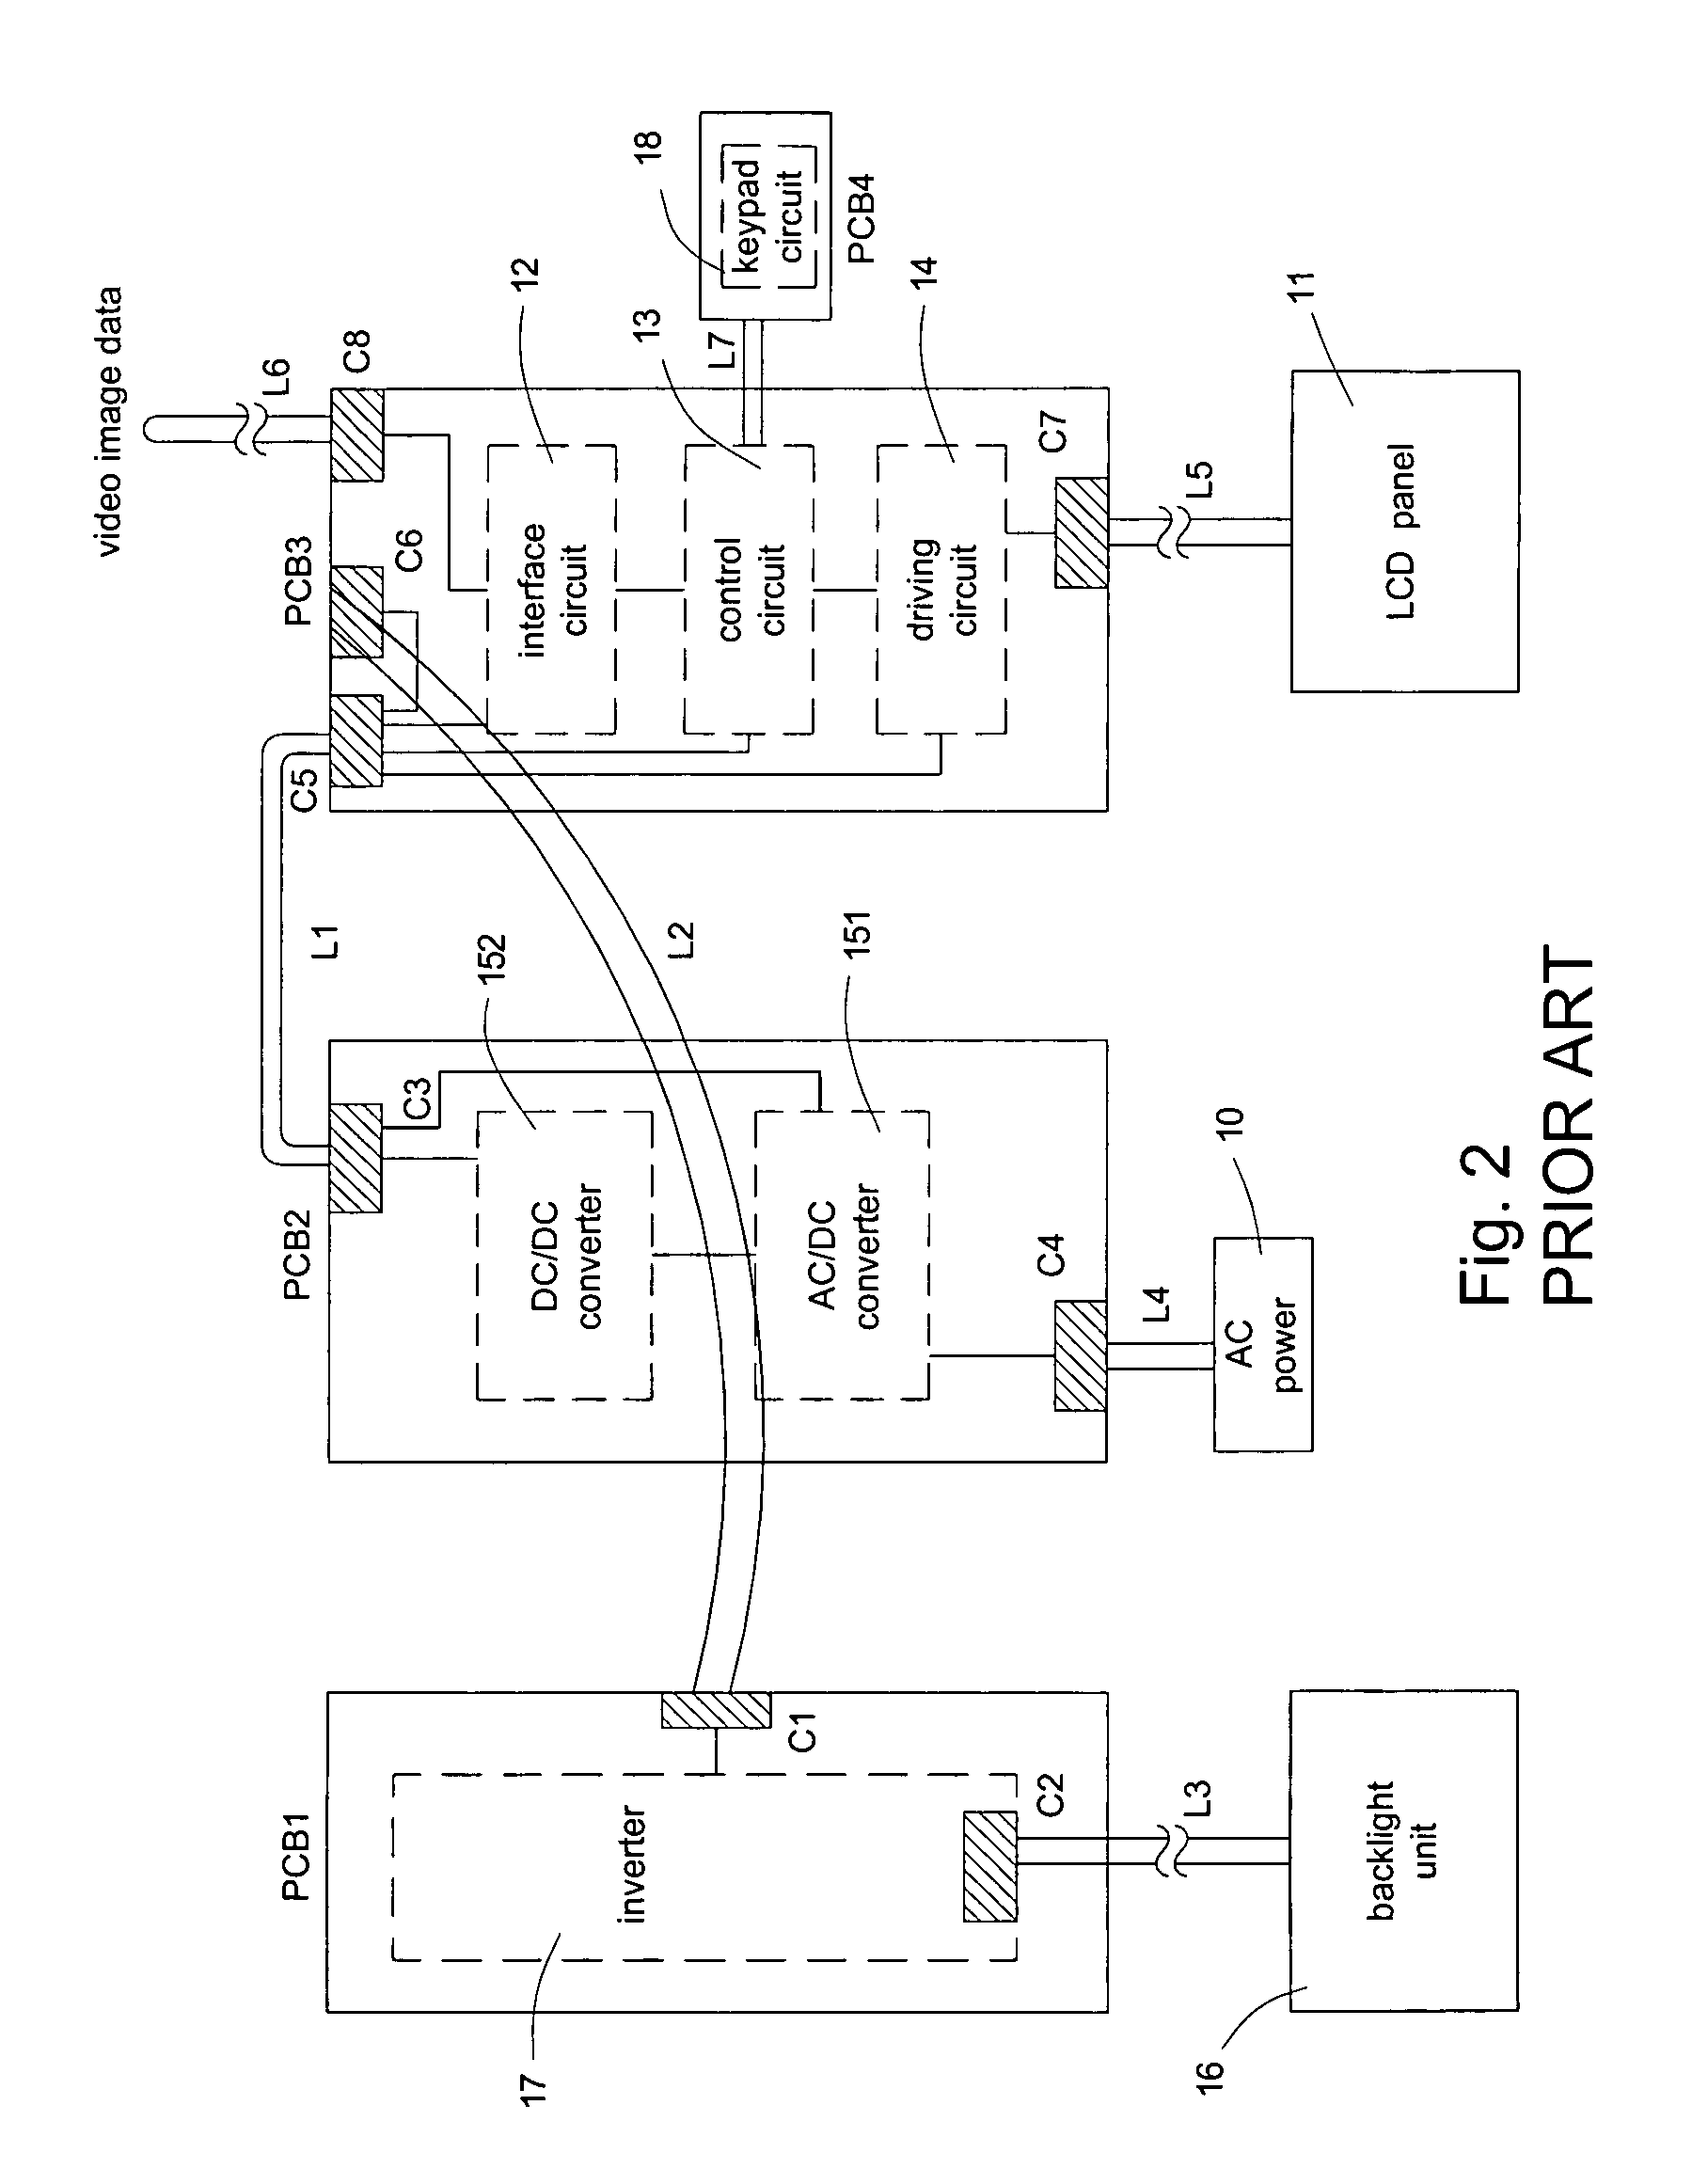 Layout configuration of flat display device